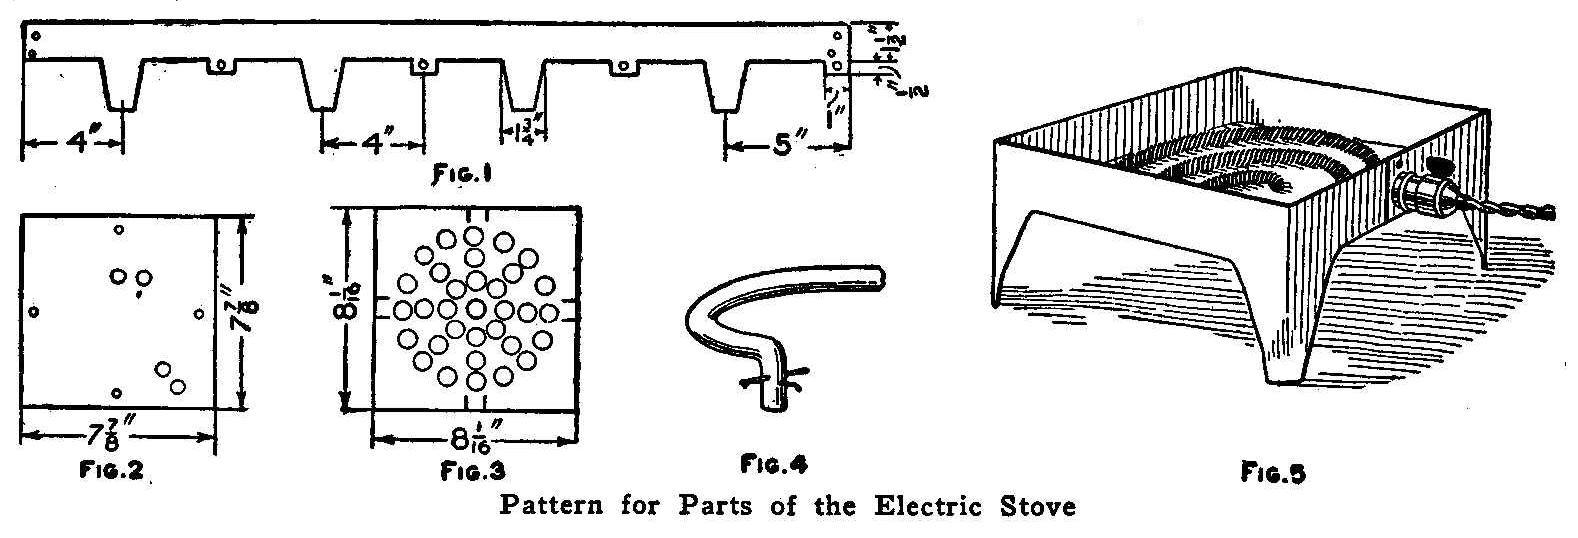 Pattern for Parts of the Electric Stove